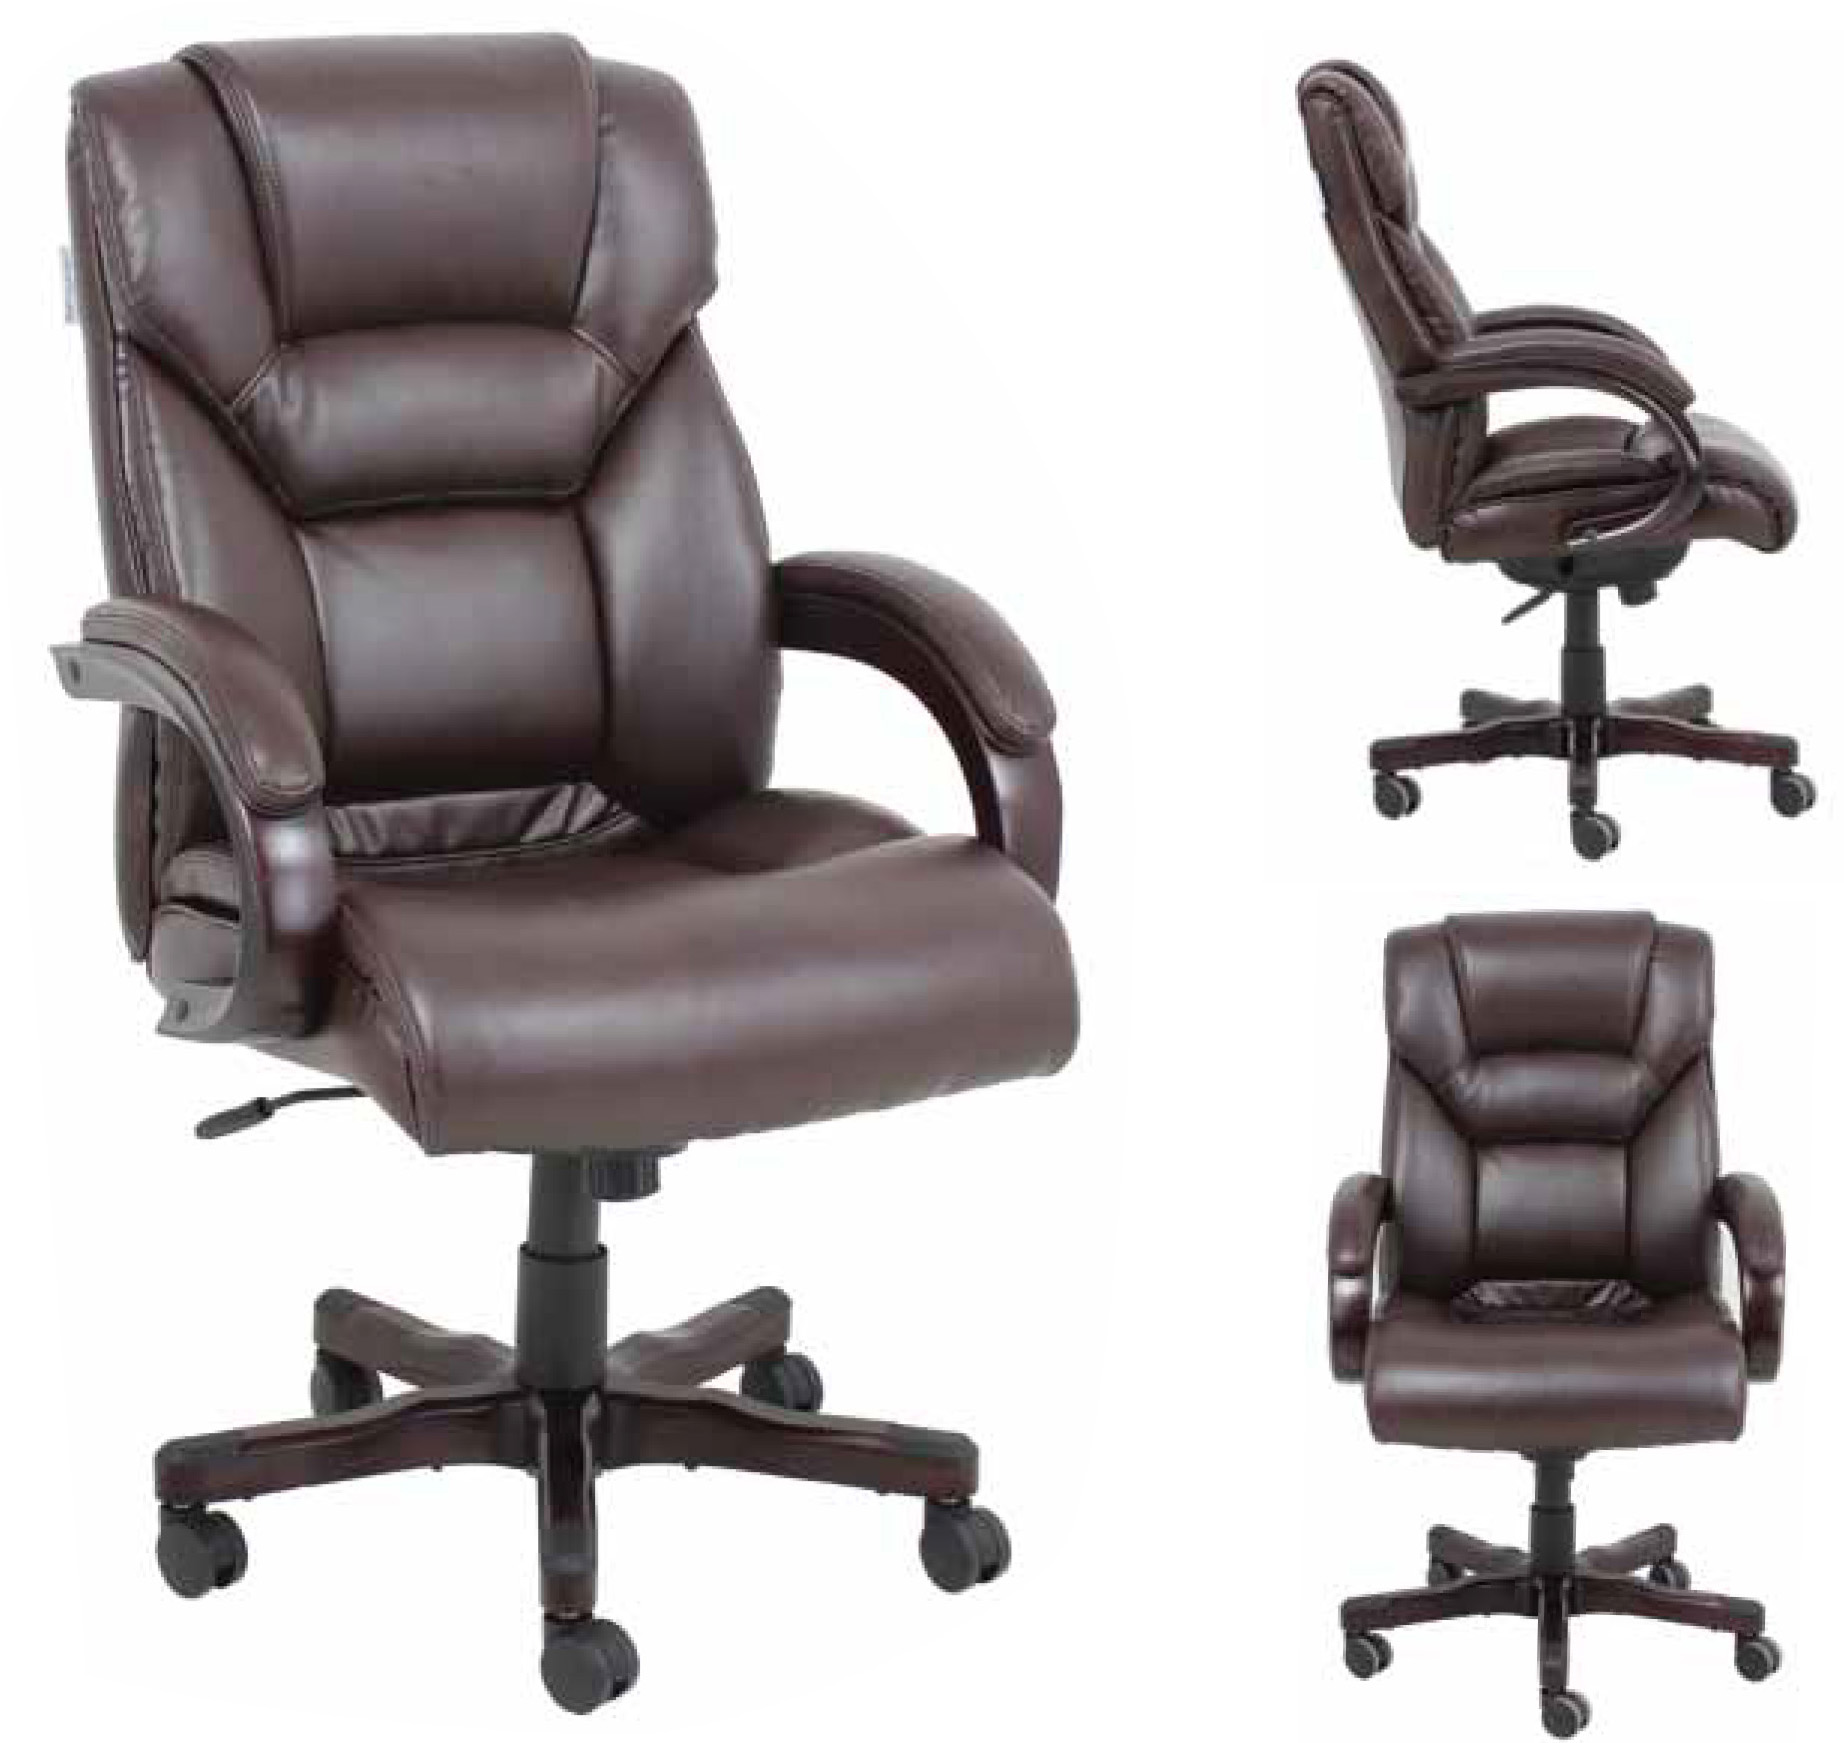 Barcalounger Neptune Ii Home Office Desk Chair Recliner Leather Recliner Chair Furniture Lounge Chair Recliners Chairs Sofas Office Chairs And Other Furniture